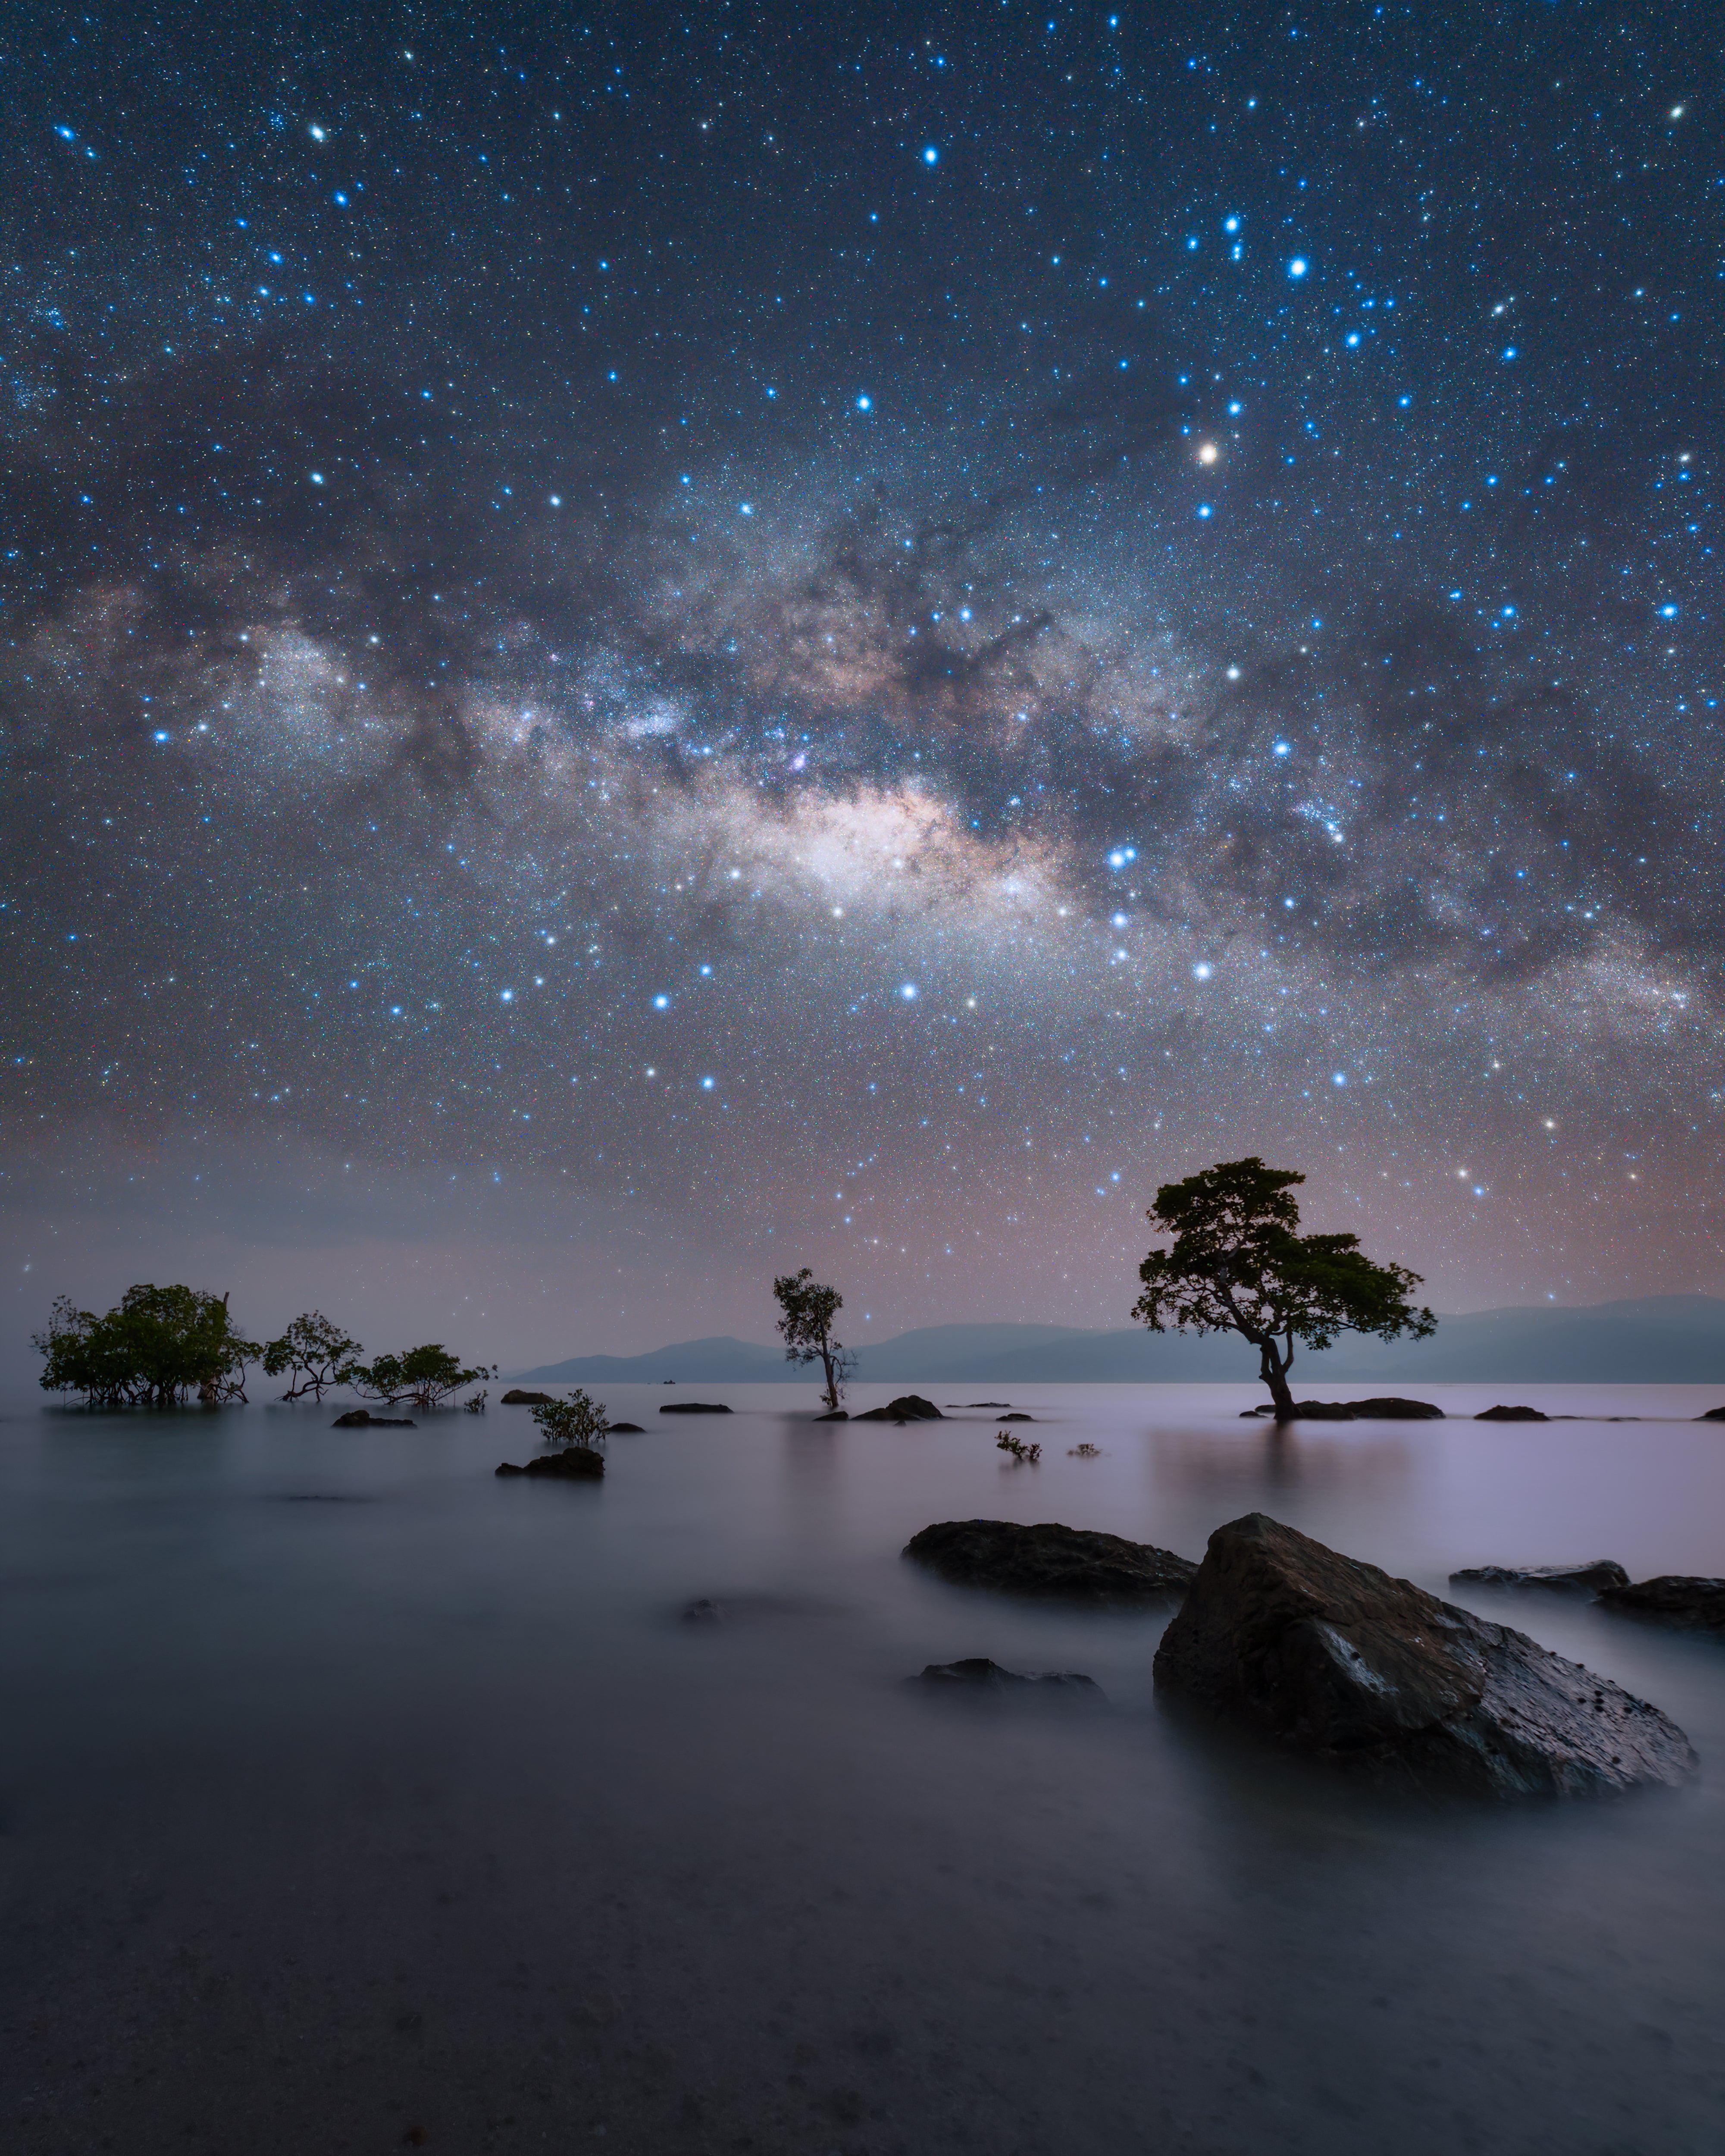 The cosmos above a nature park in the Andaman Islands. (Photo: © Vikas Chander)